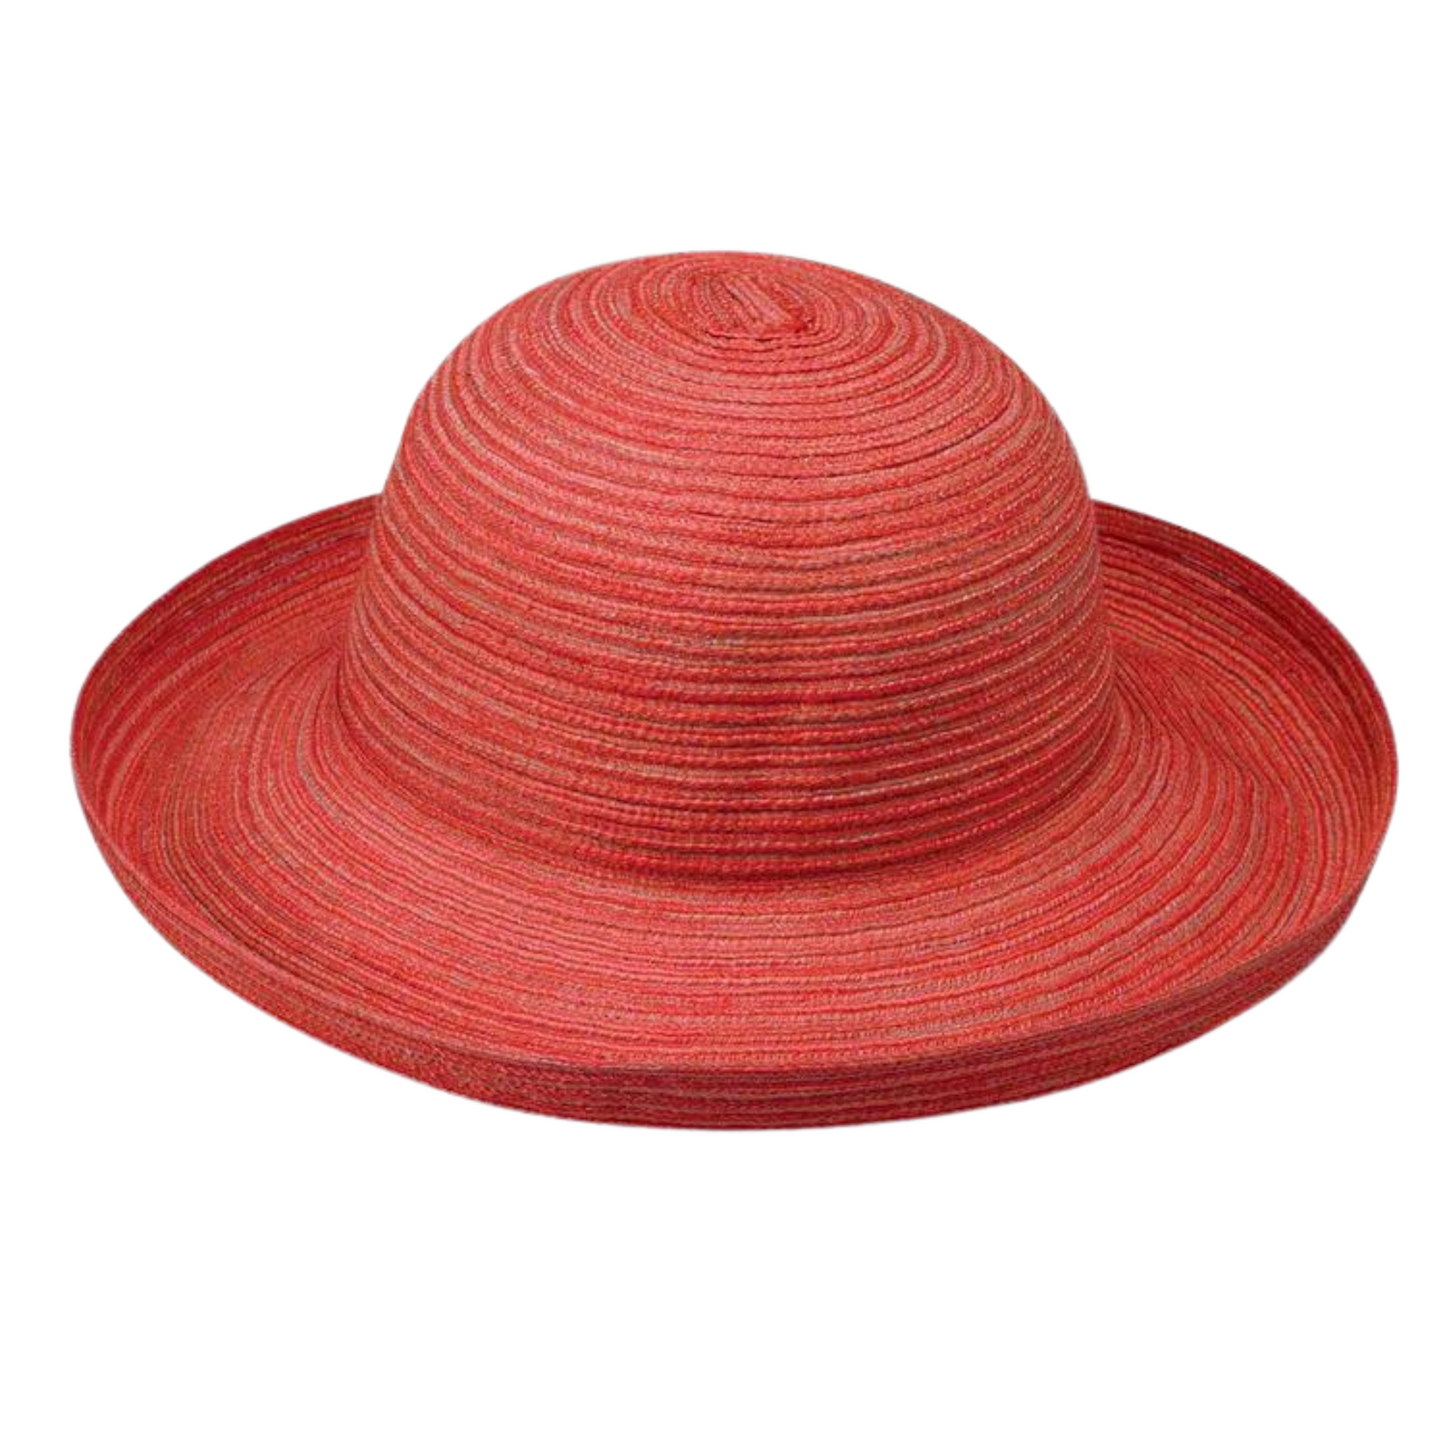 A red hat is pictured with a turned up brim and bowl-like headpiece. 